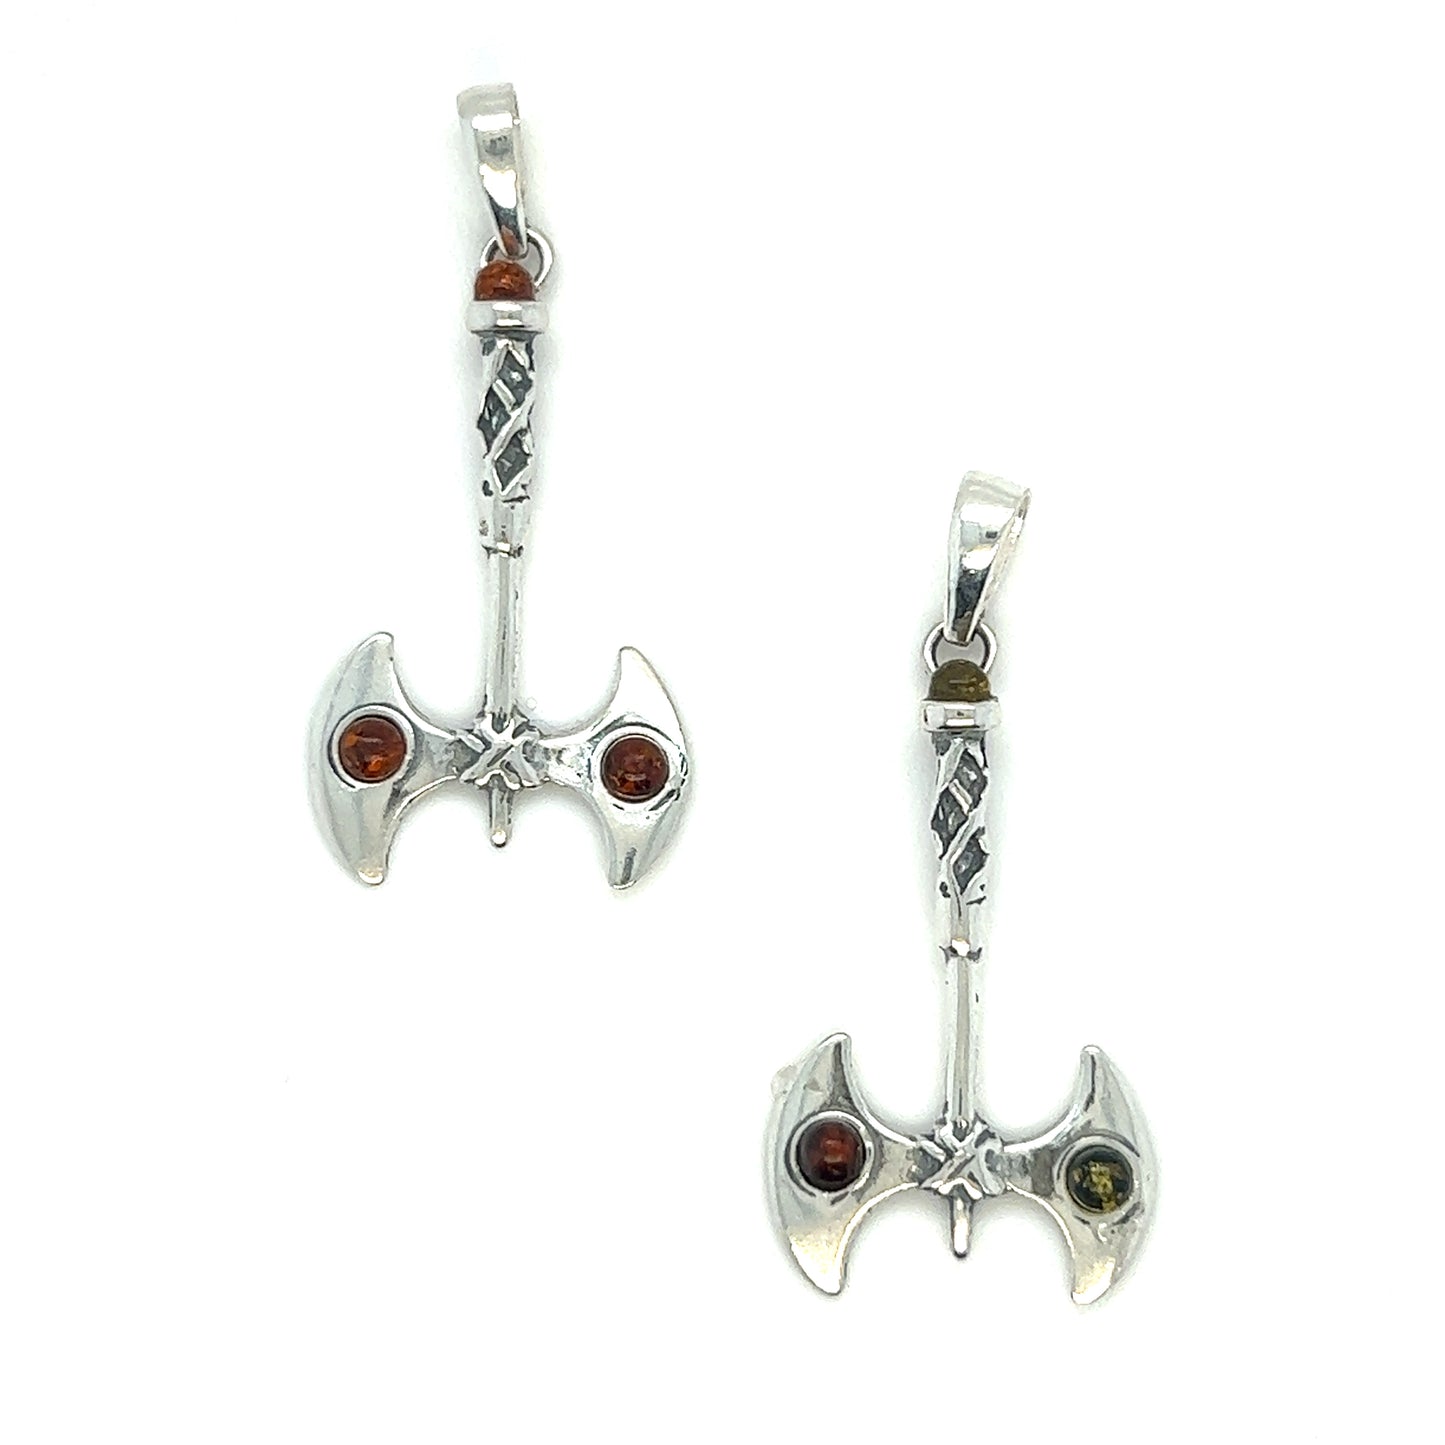 Two Super Silver Amber Accented Battle Axe Pendants with garnet stones.